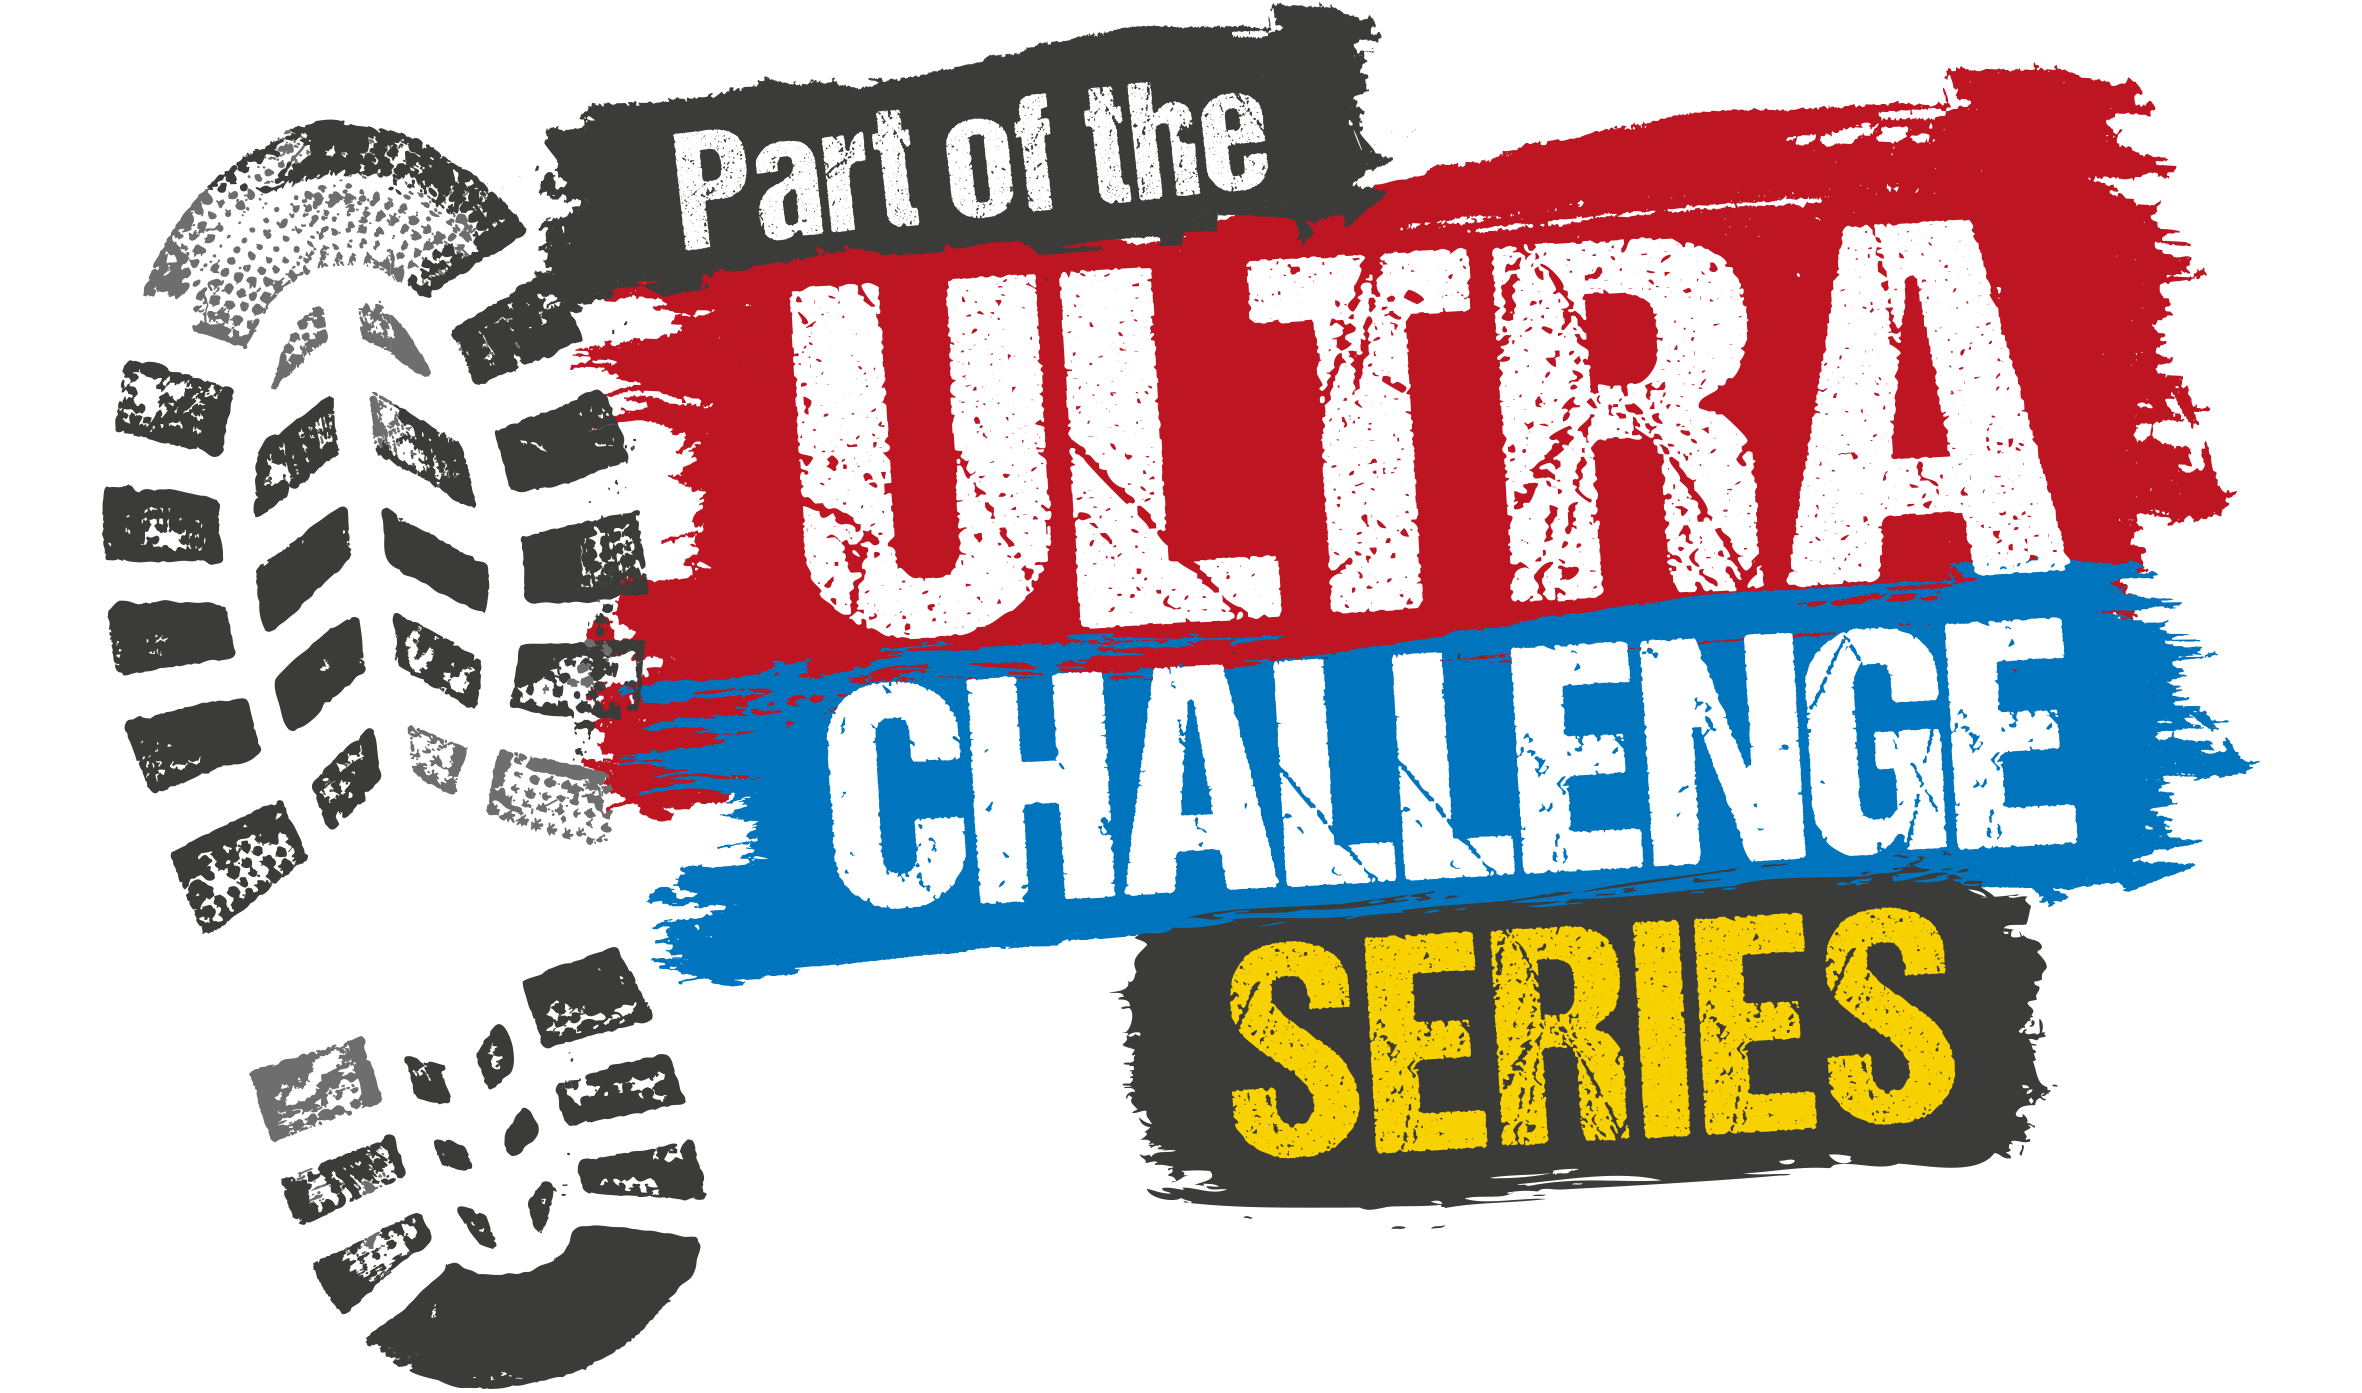 Part of the ultra challenge series logo